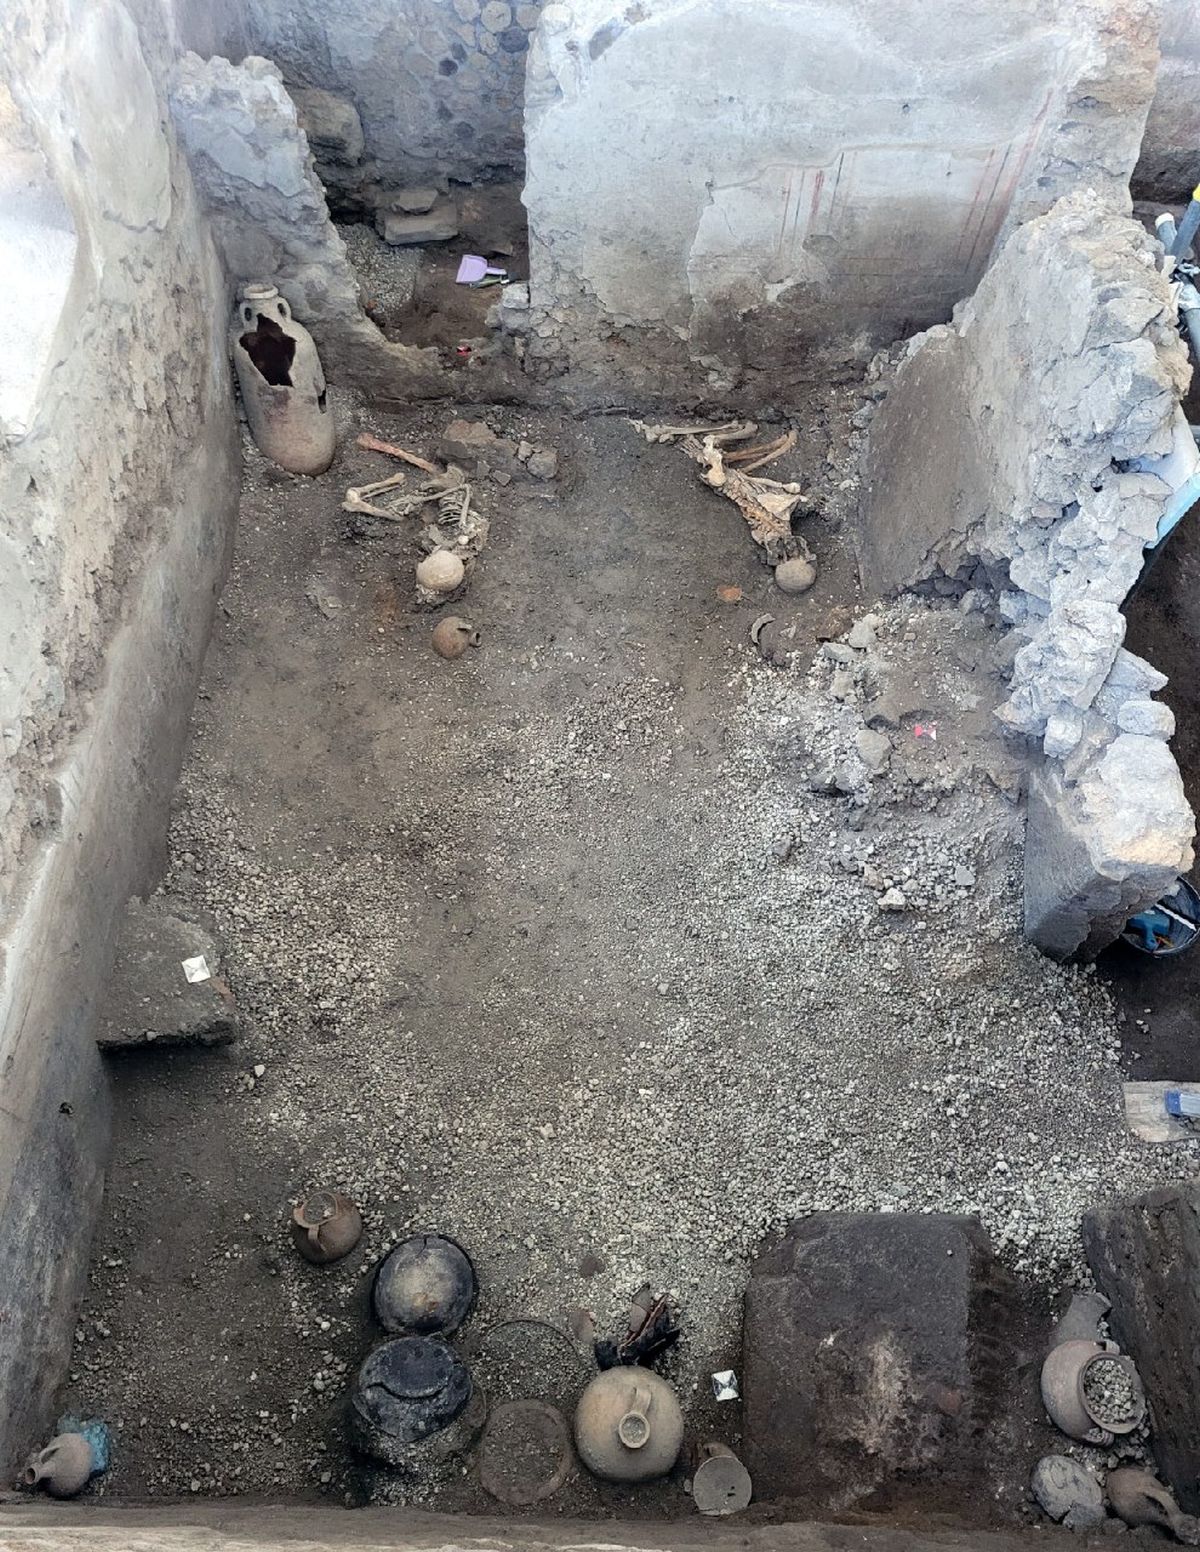 Historical Artifacts - Another amazing discovery was made in Pompeii - at a collapsed ancient wall, in the so-called In the House of Chaste Lovers, two human skeletons were found. u/imperiumromanum